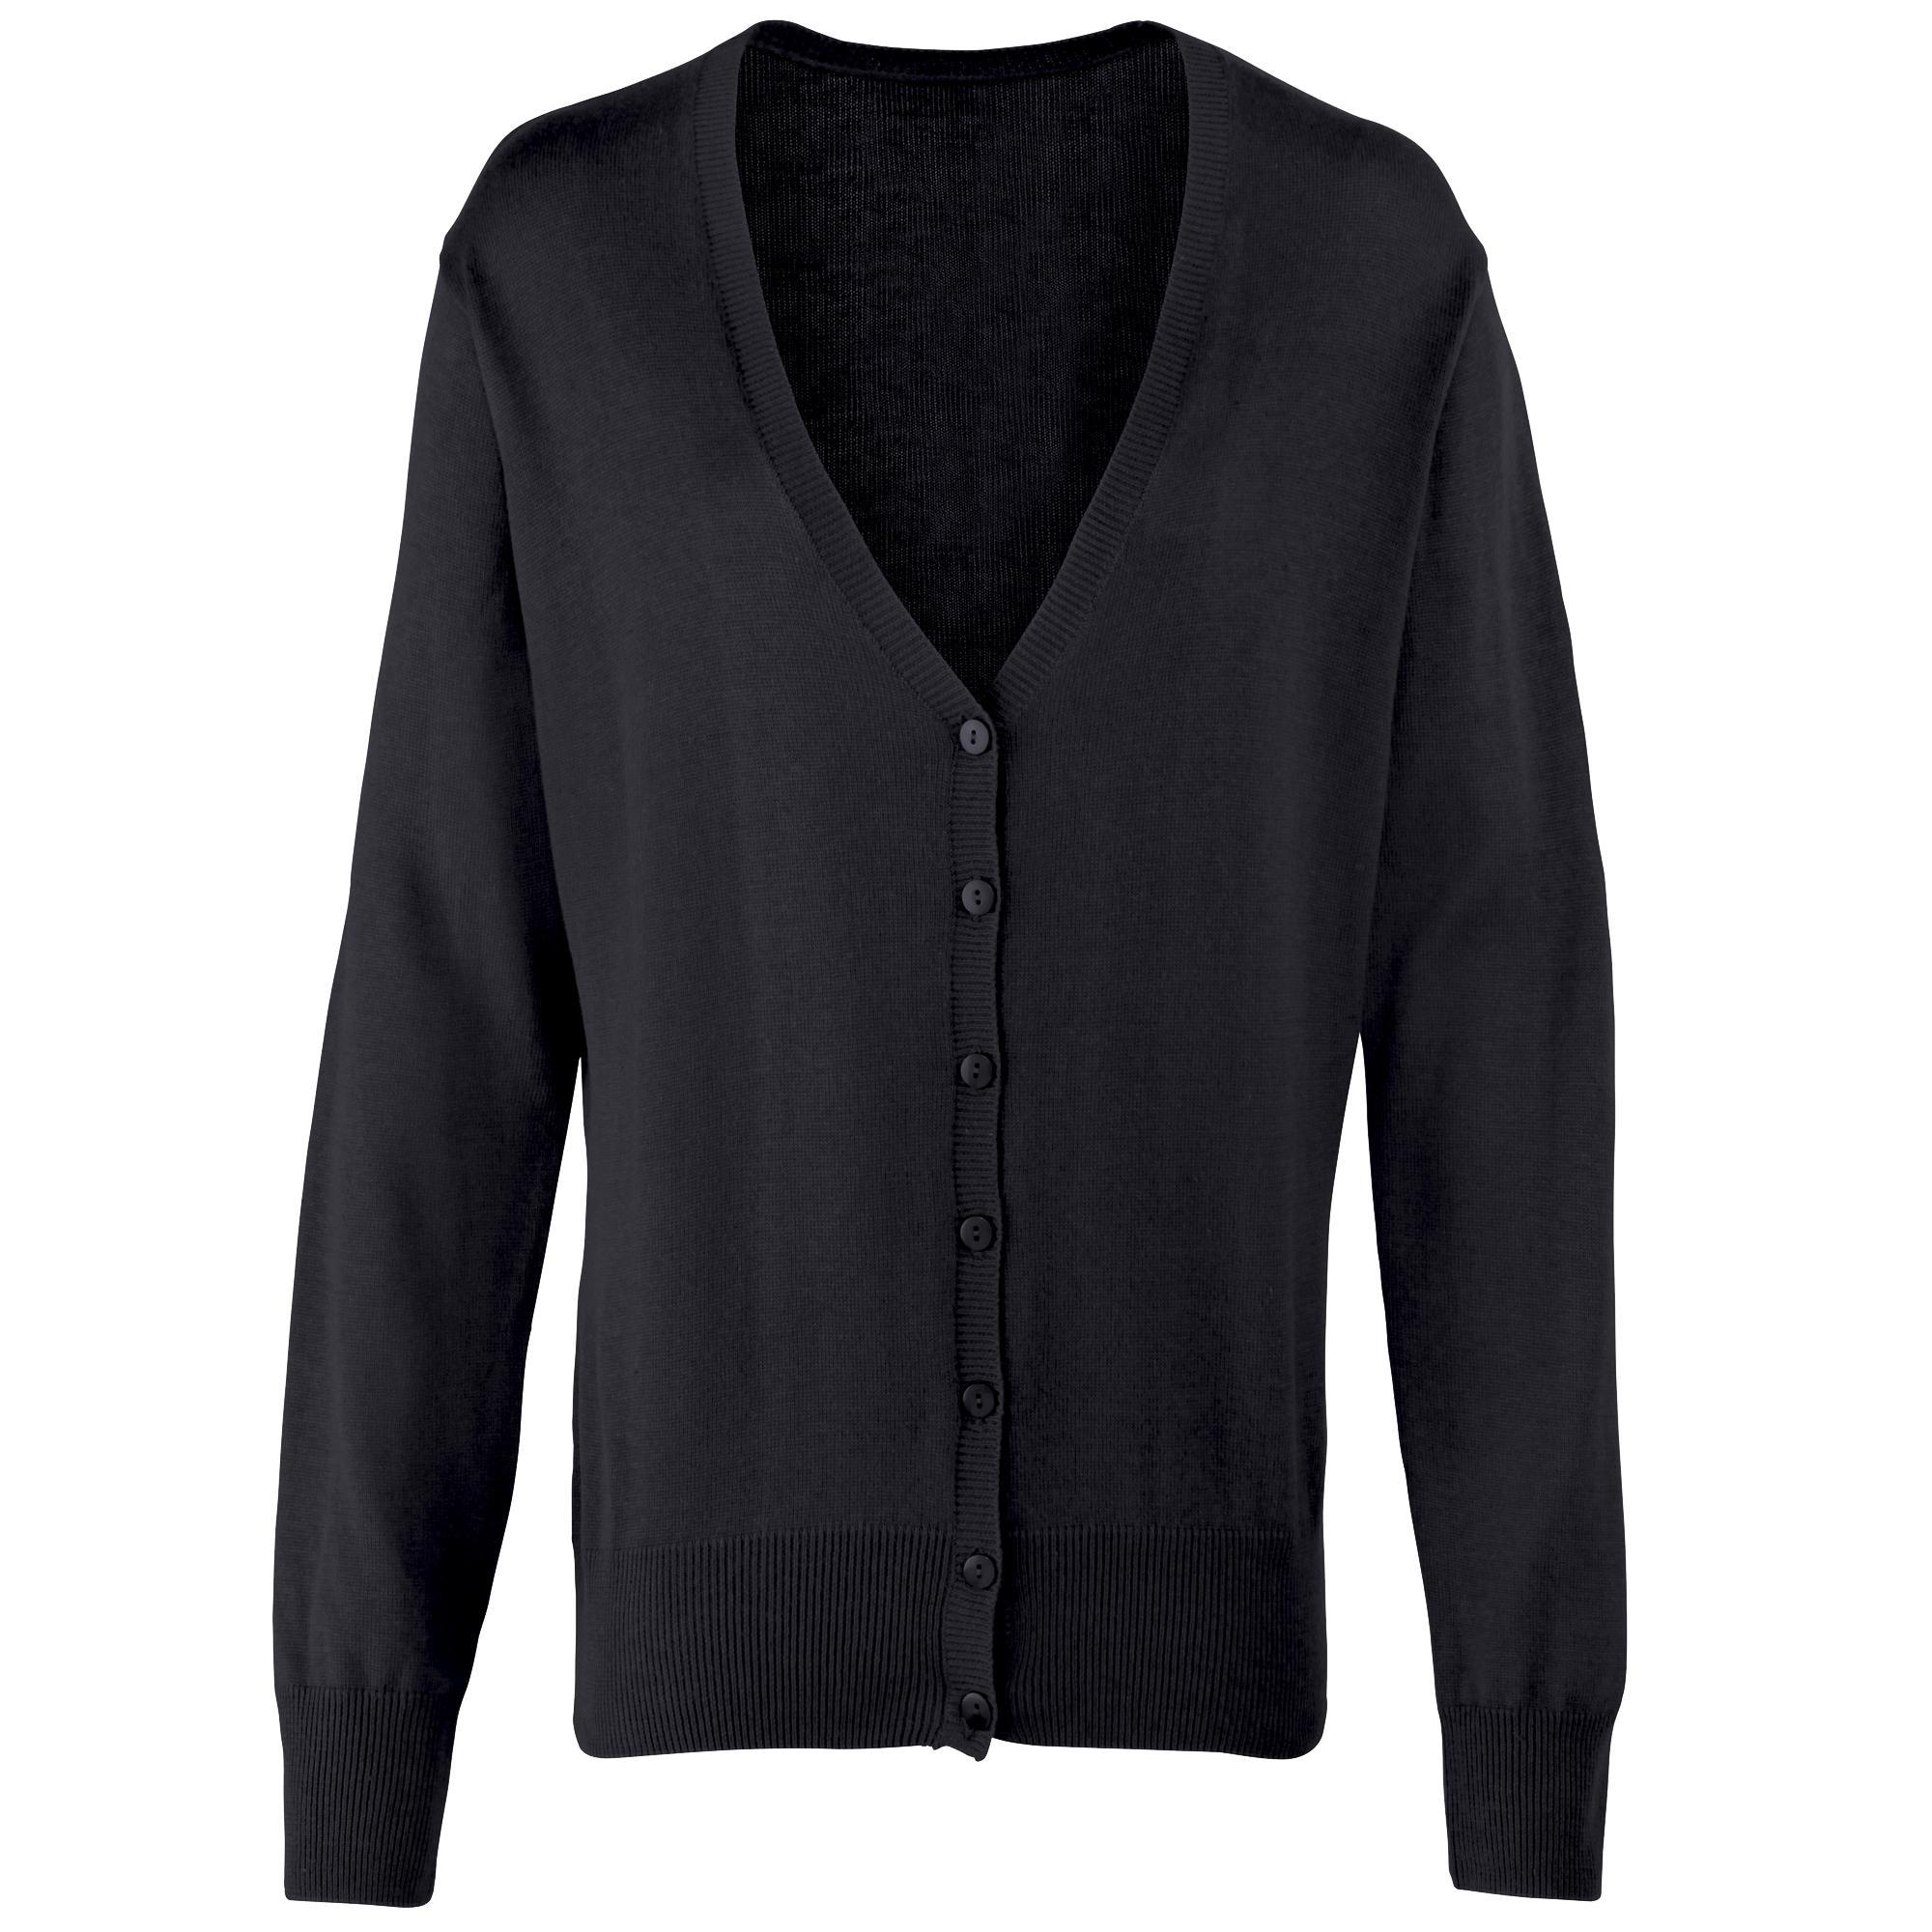 Premier Womens/Ladies Button Through Long Sleeve V-neck Knitted Cardigan (Black) (16)